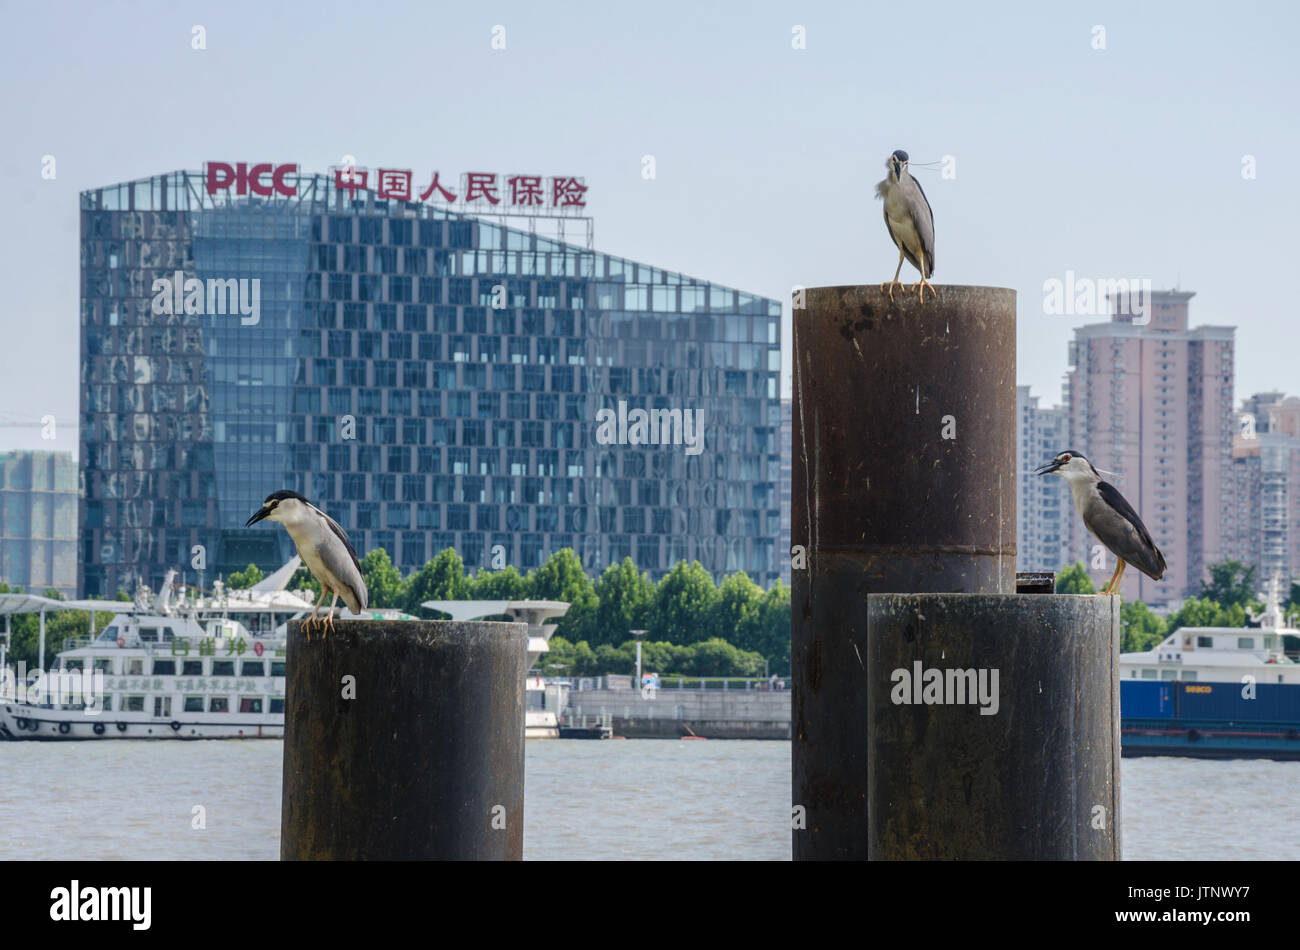 Herons sit on pillars on the edge of the Huangpu River in Shanghai, China. Stock Photo